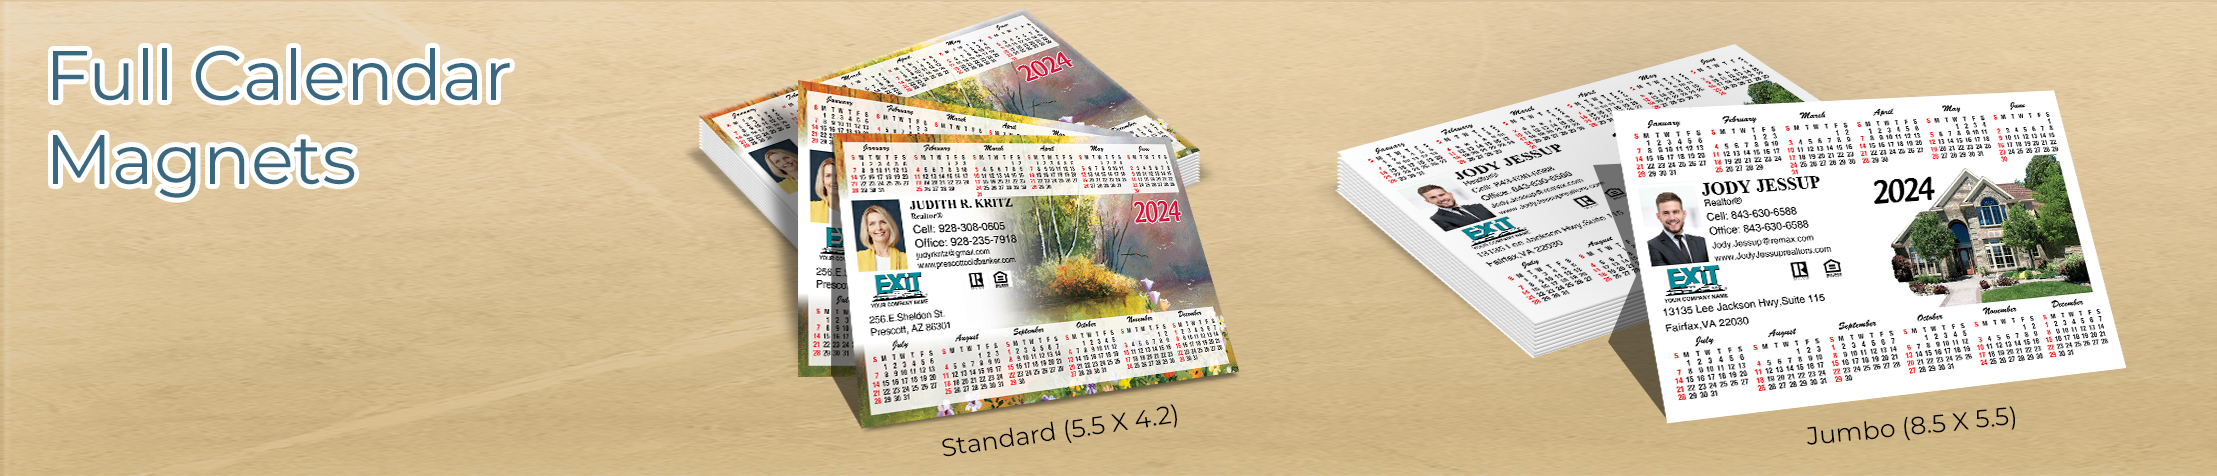 Exit Realty Full Calendar Magnets - Exit Realty approved vendor 2019 calendars in Standard or Jumbo Size | BestPrintBuy.com